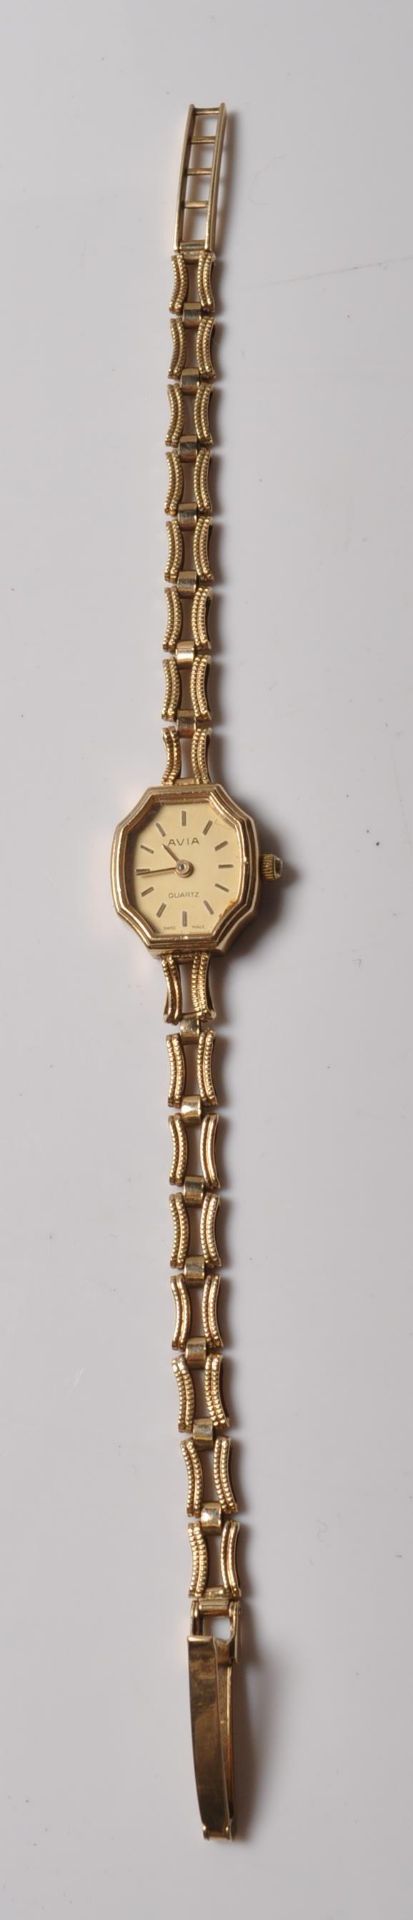 VINTAGE AVIA 9CT GOLD COCKTAIL WATCH